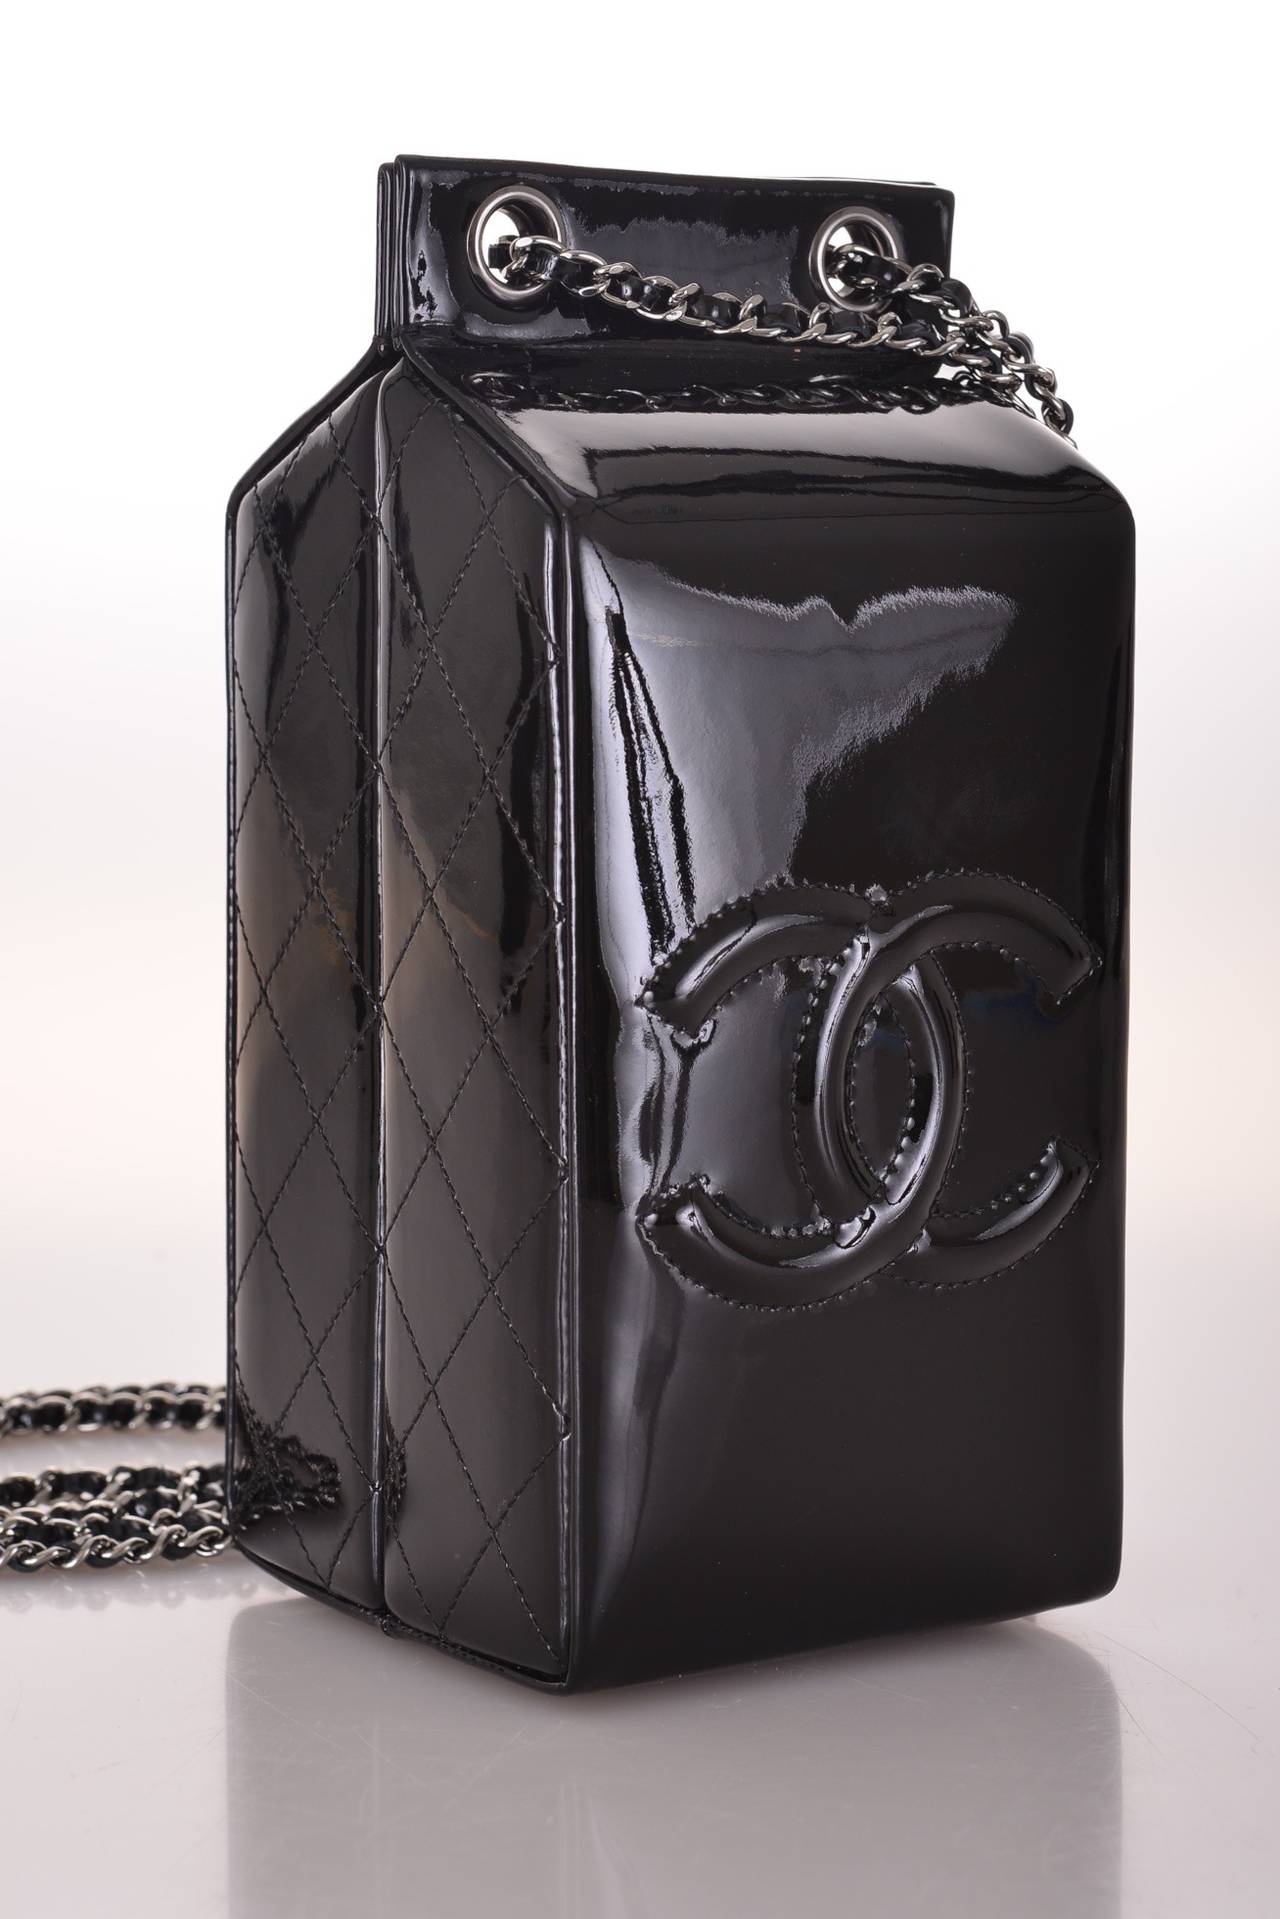 LIMITED EDITION RUNWAY Chanel MILK BOTTLE BLACK PATENT LEATHER CLASSIC 2